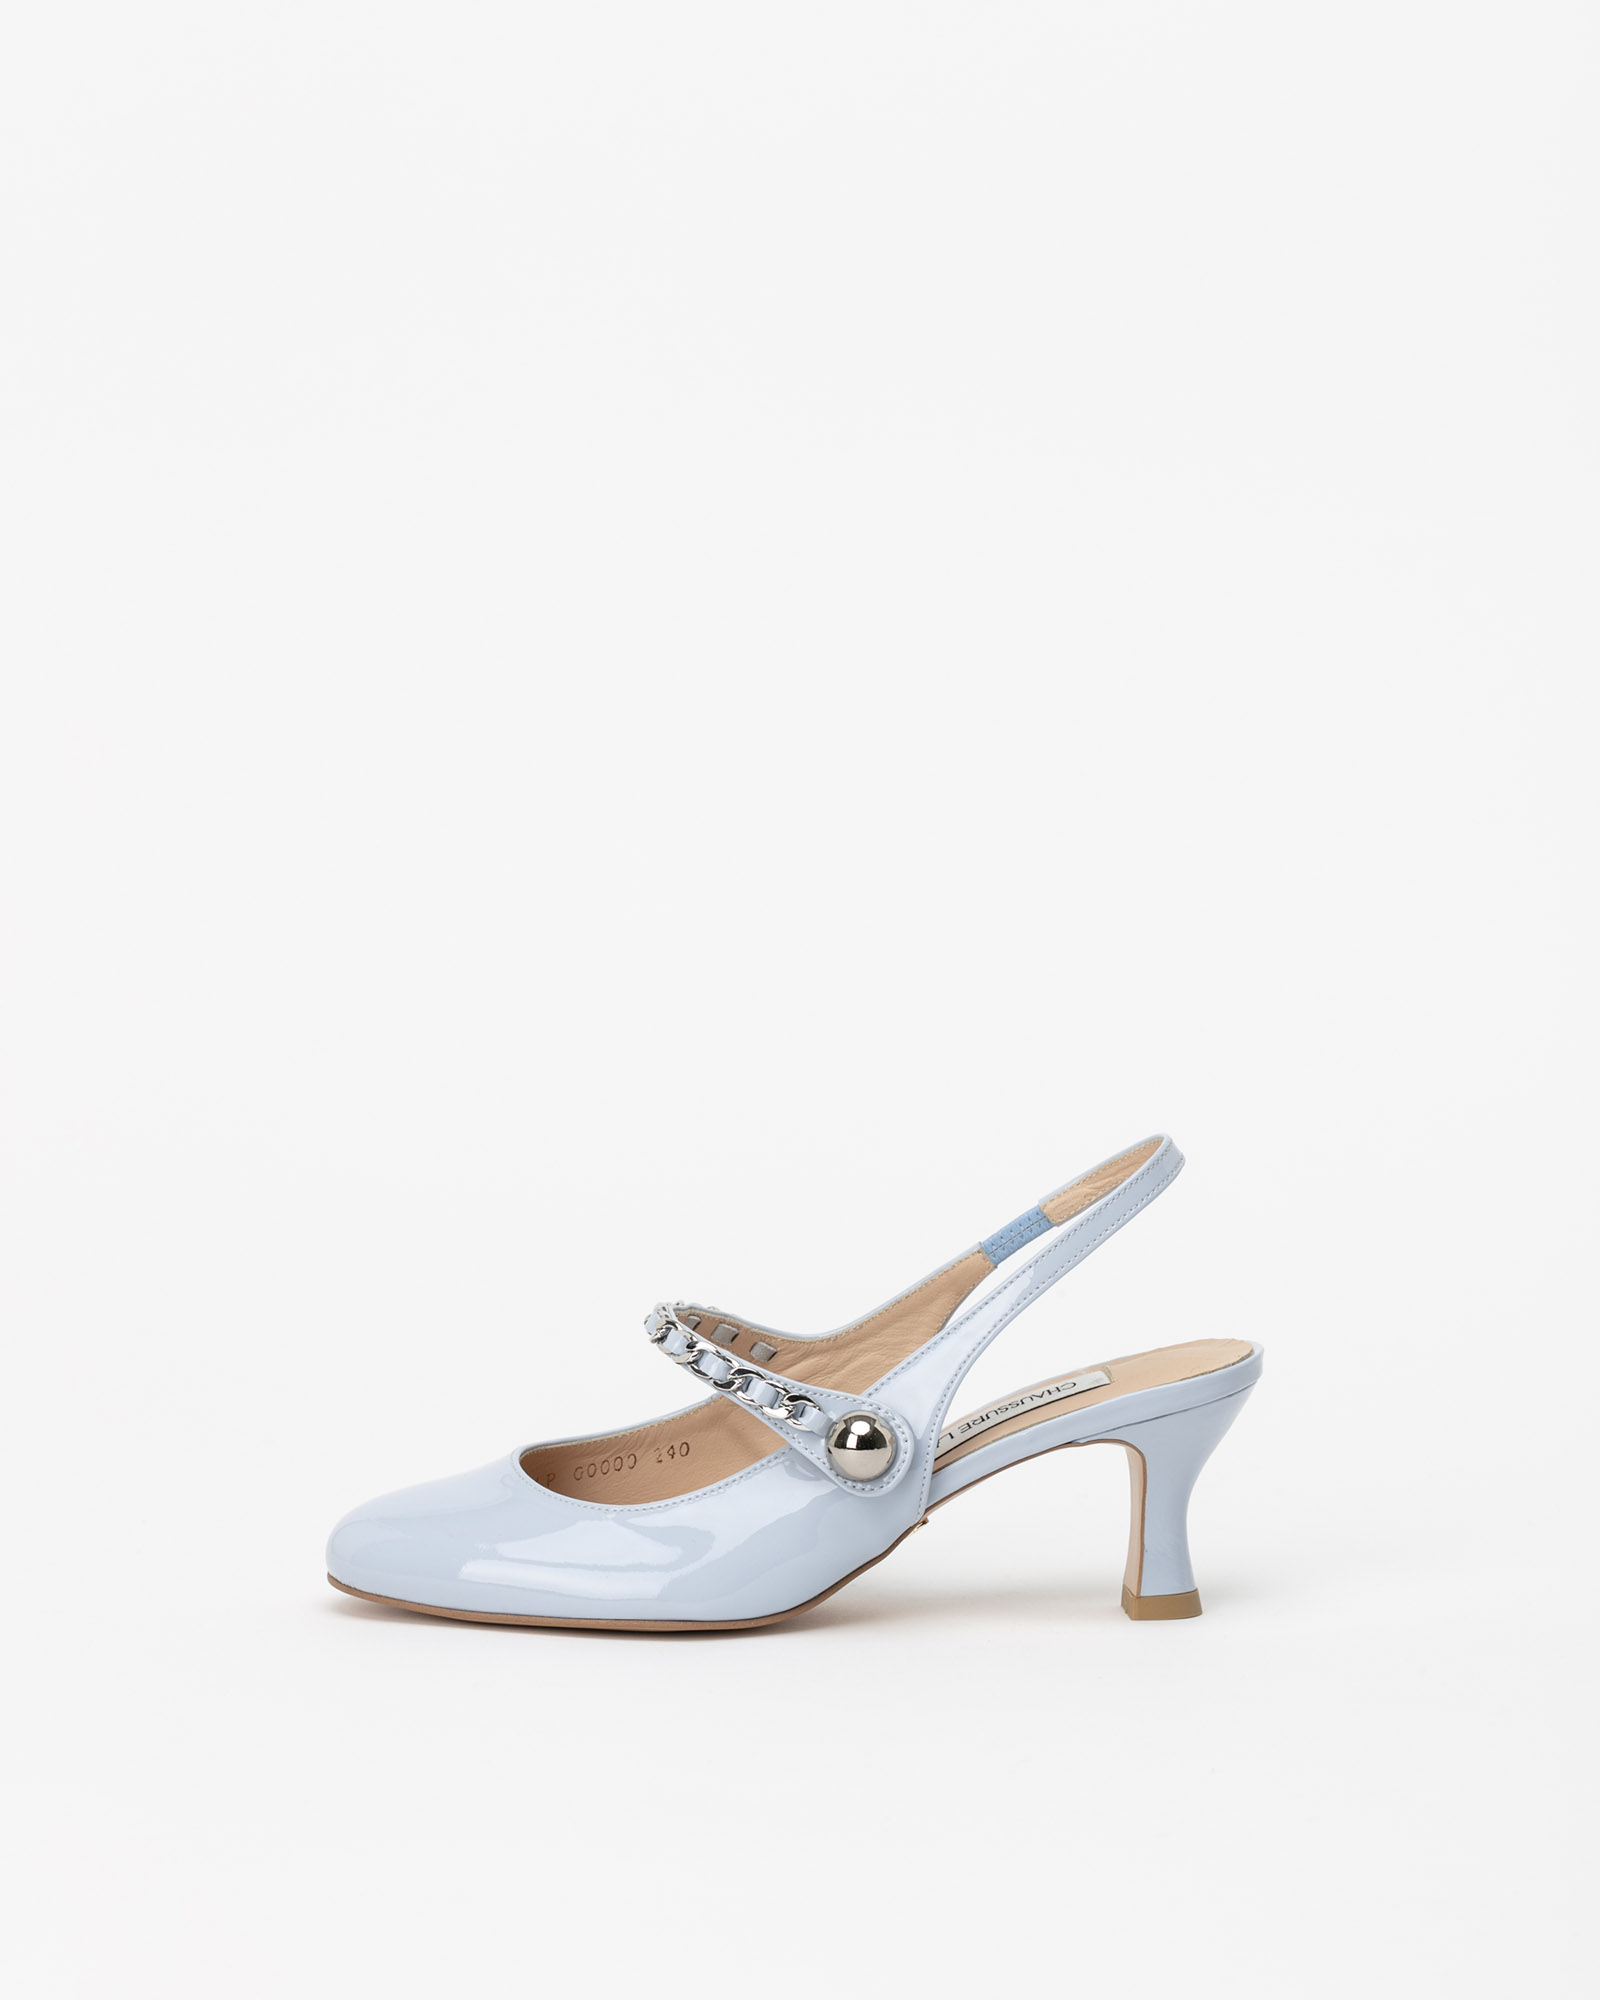 Aria Chained Slingback Pumps in Skywriting Patent